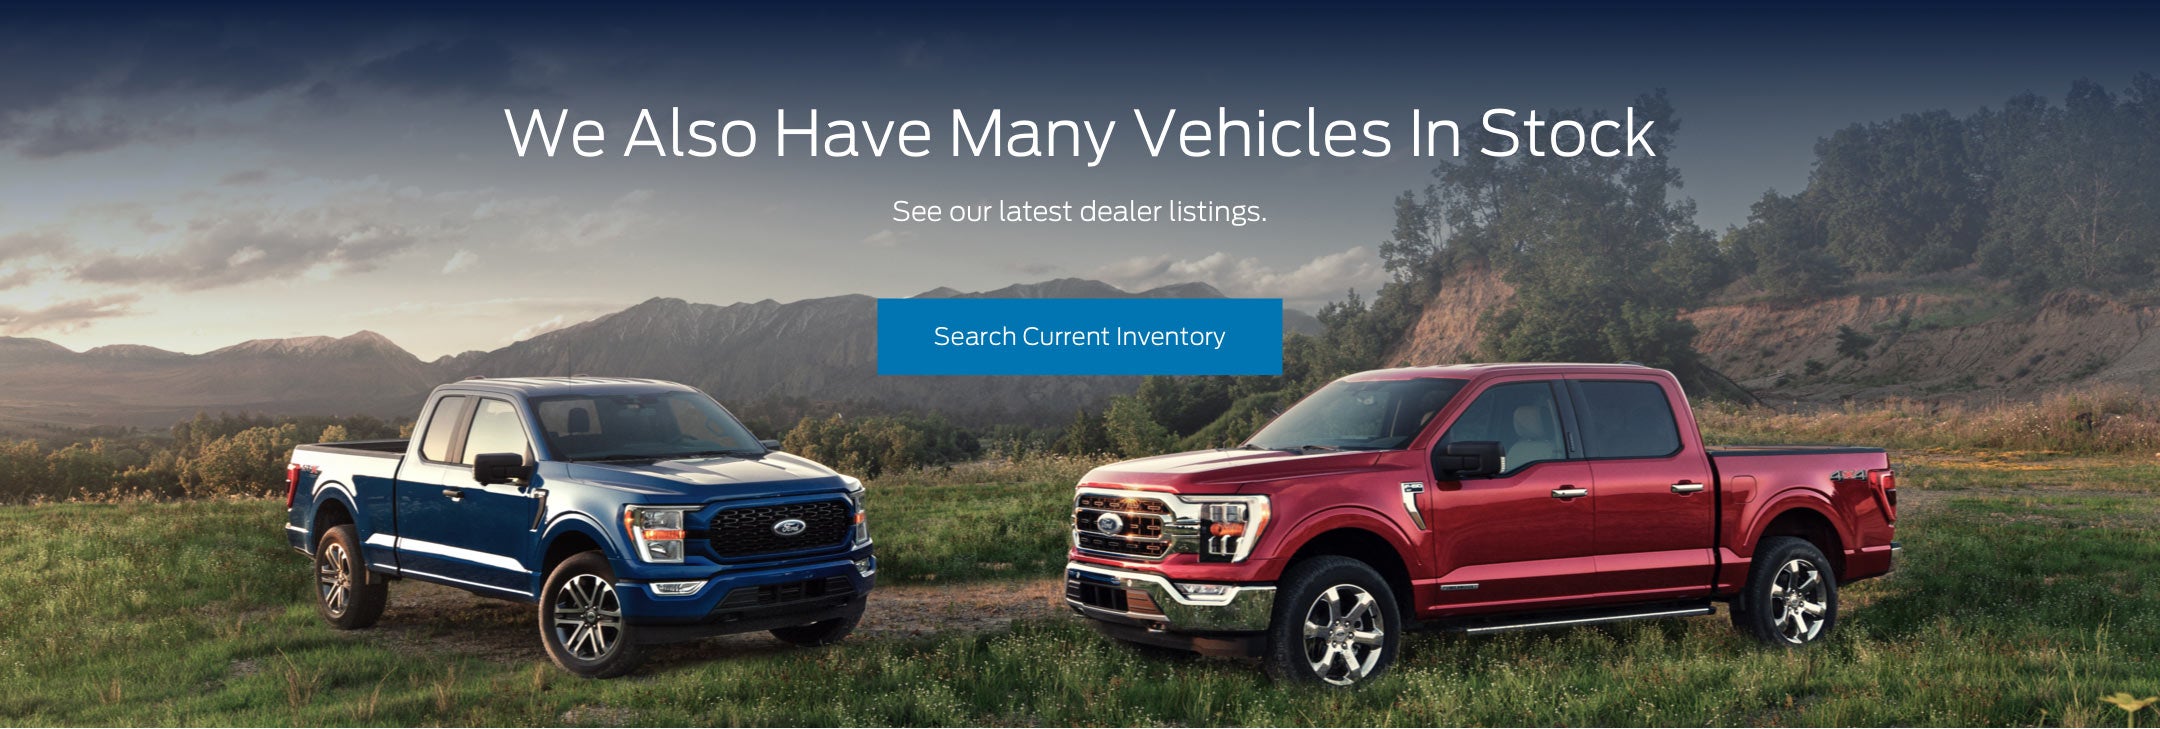 Ford vehicles in stock | Mooresville Ford in Mooresville NC